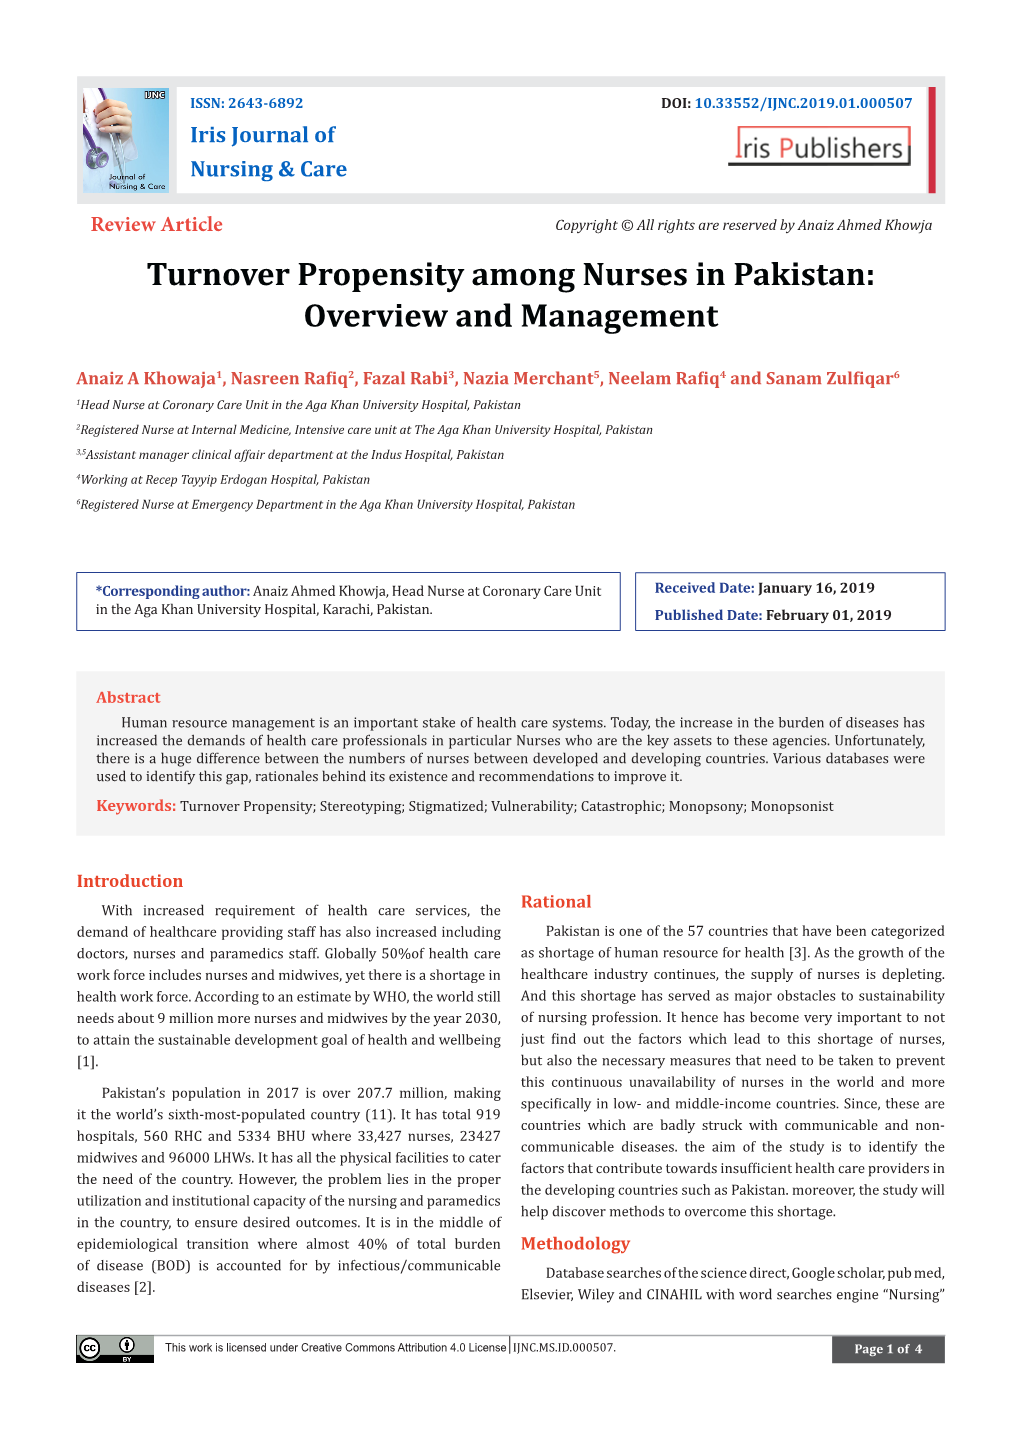 Turnover Propensity Among Nurses in Pakistan: Overview and Management